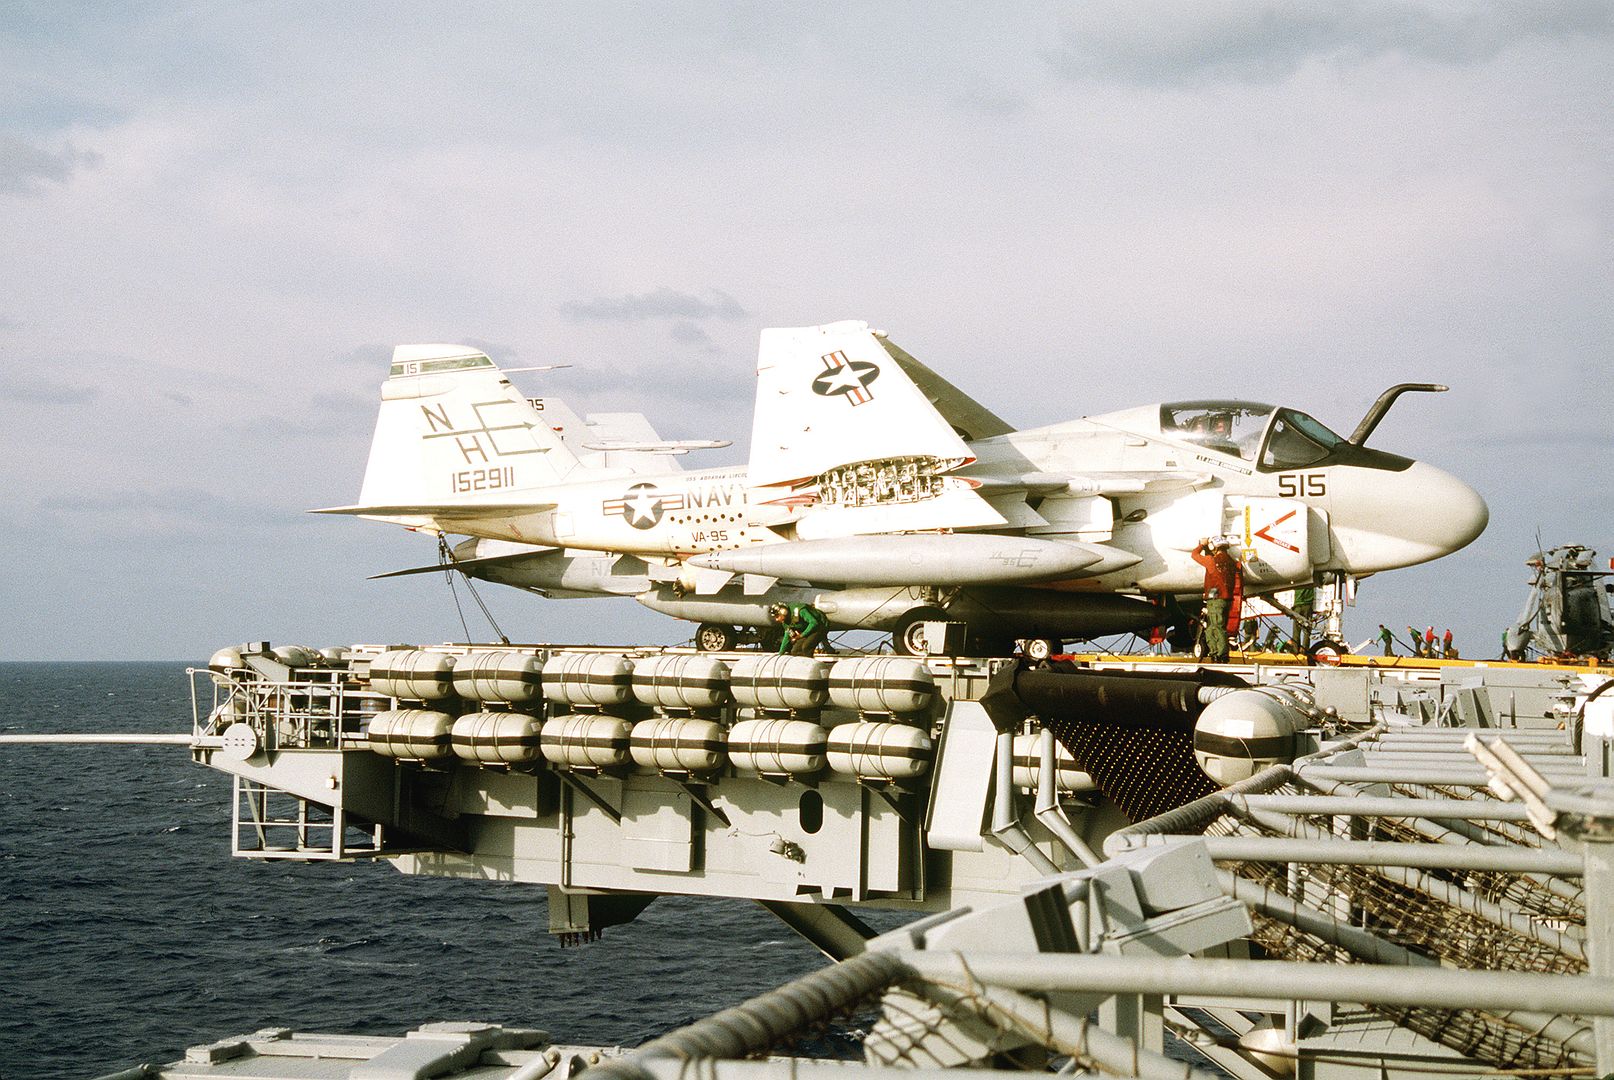 An Attack Squadron 95 KA 6D Intruder Aircraft Sits Parked On The Edge Of The Flight Deck Of The Nuclear Powered Aircraft Carrier USS ABRAHAM LINCOLN